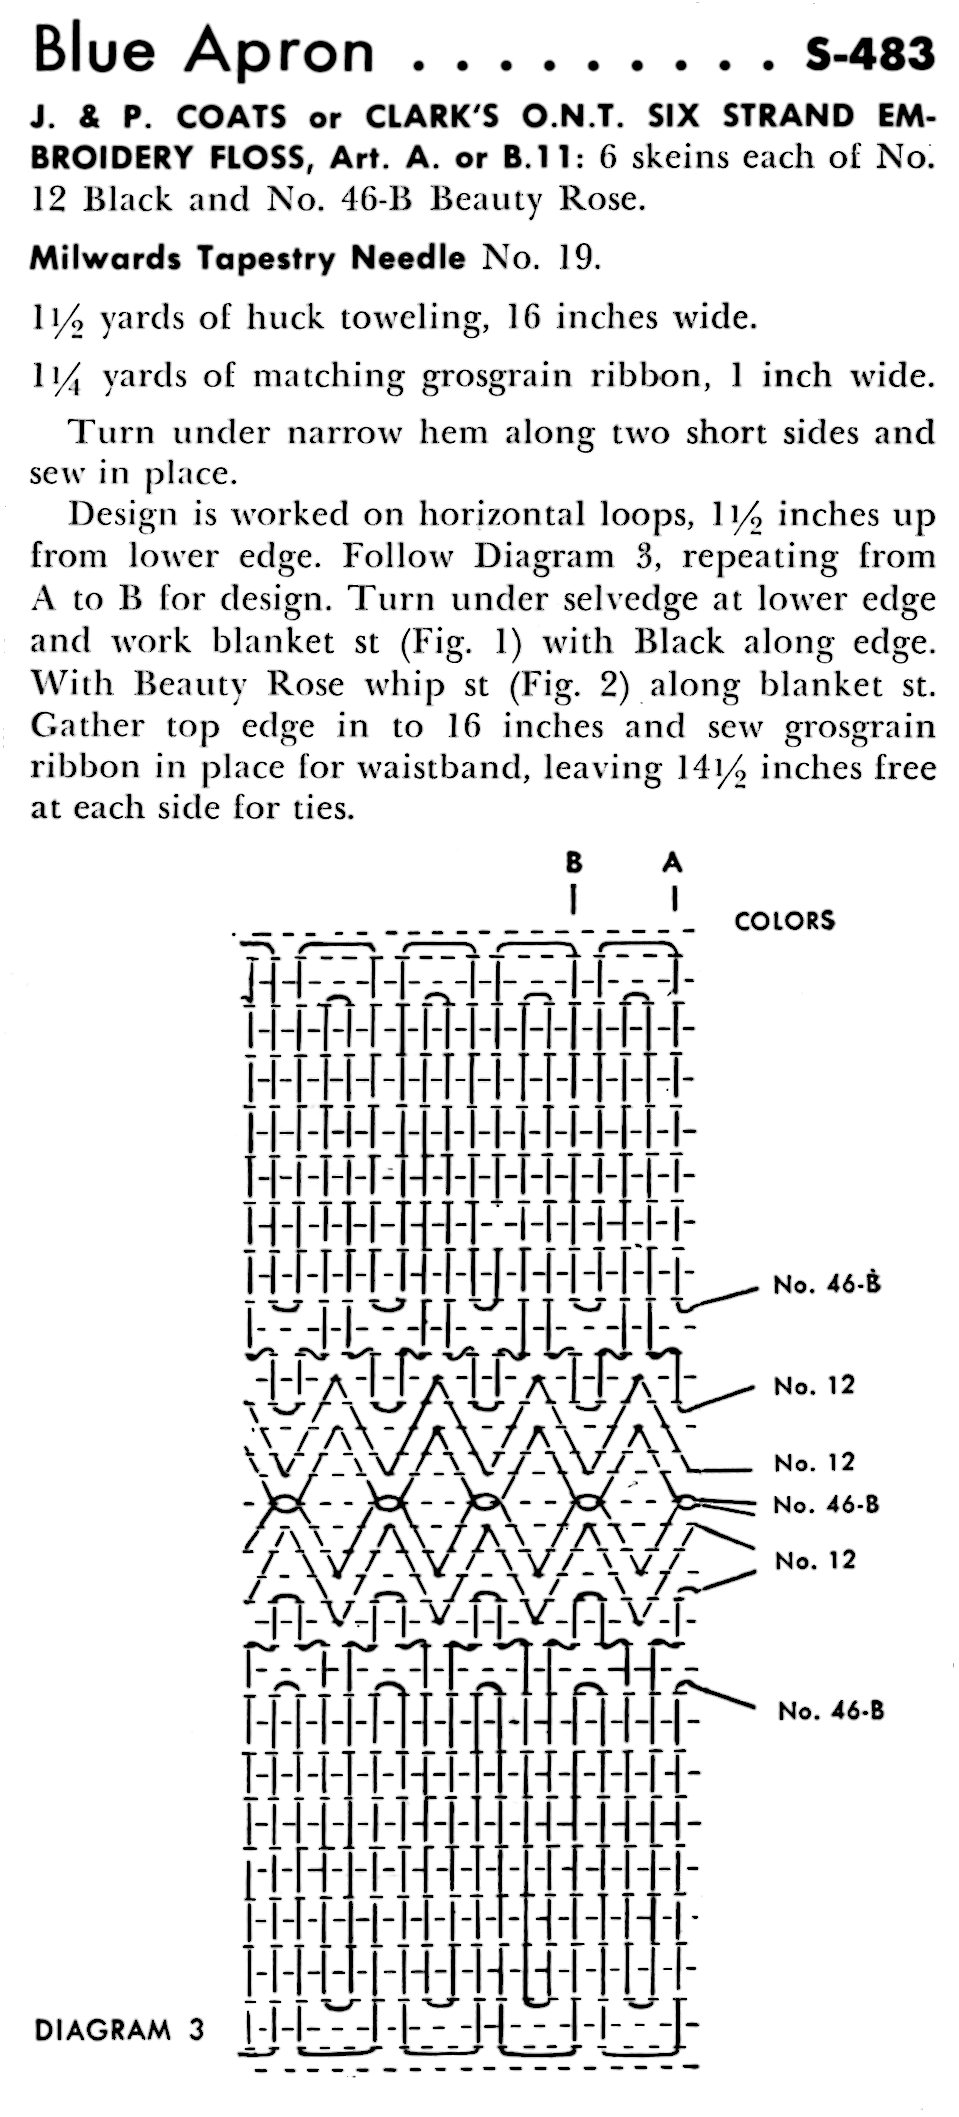 Huck Embroidery Patterns Swedish Weaving Patterns For Towels Place Mats And An Apron